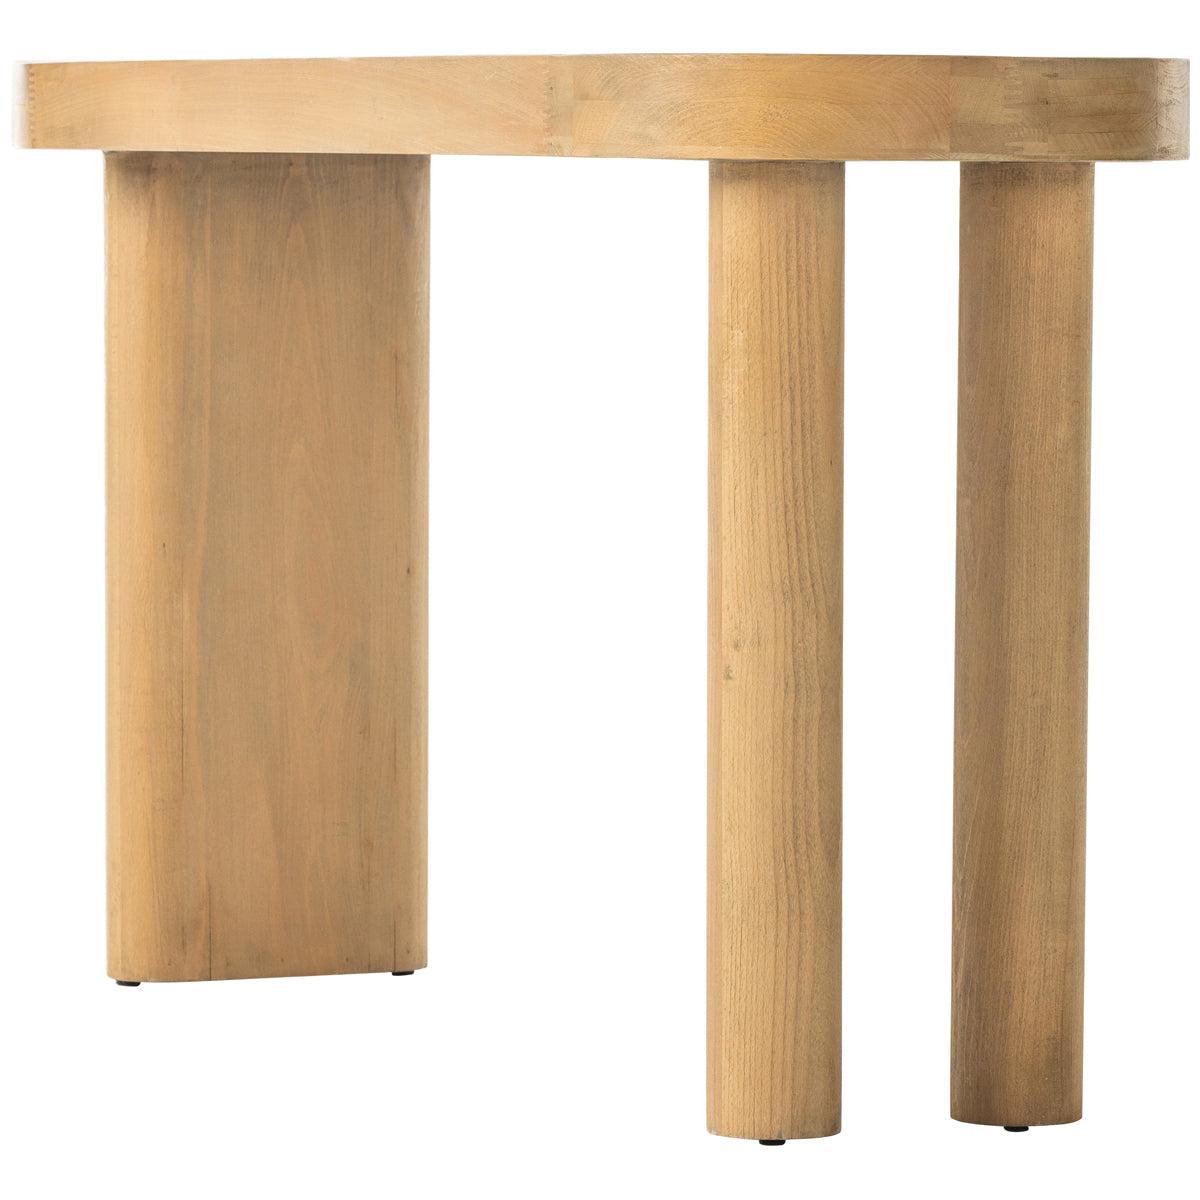 Four Hands Westgate Schwell Console Table - Natural Beech